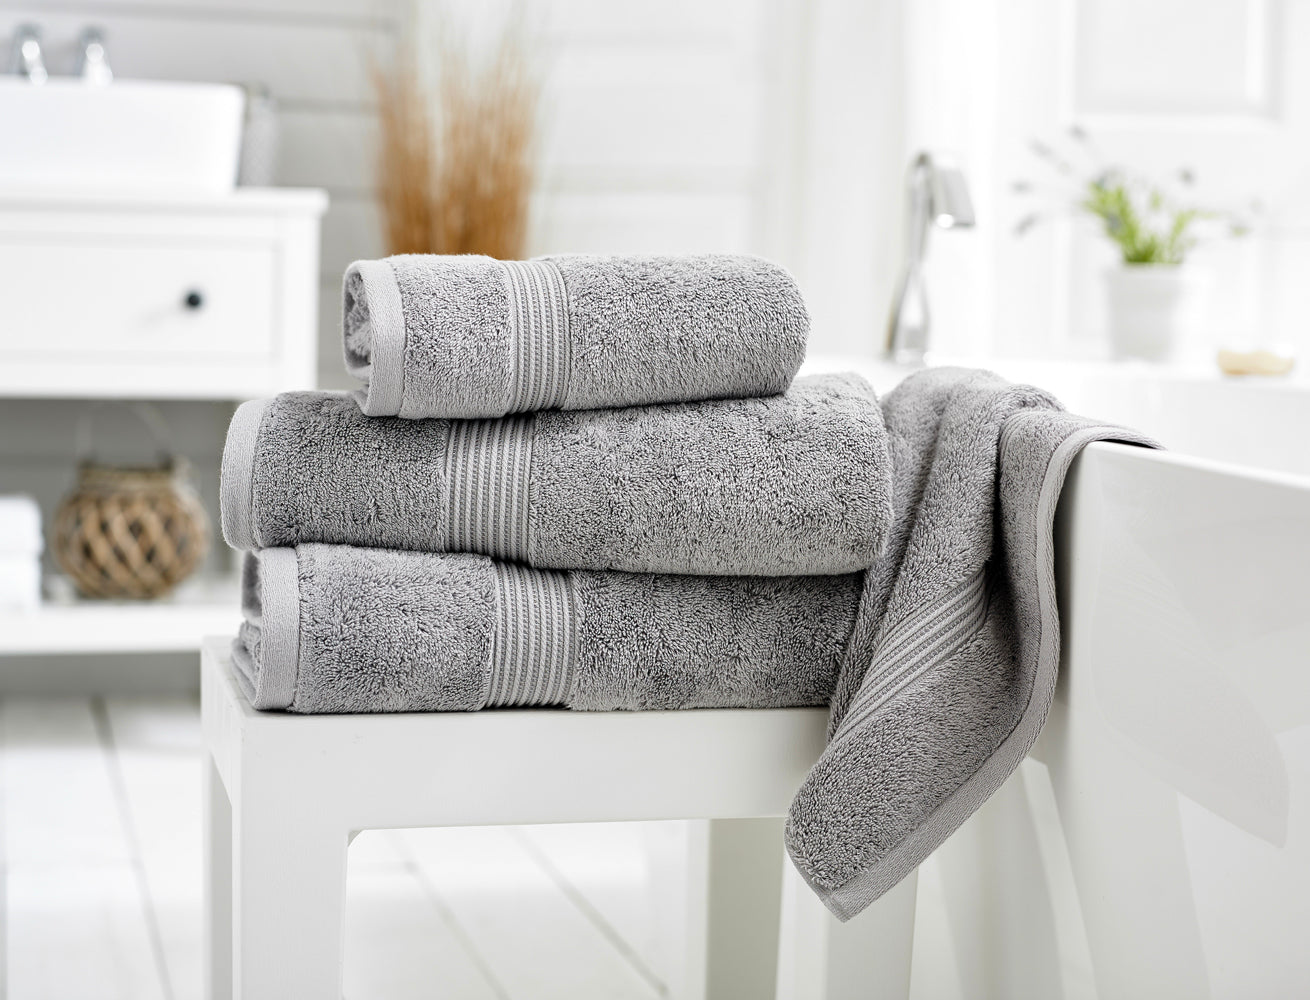 The Lyndon Company Sanctuary 650 GSM Ultimate Combed Cotton Towel